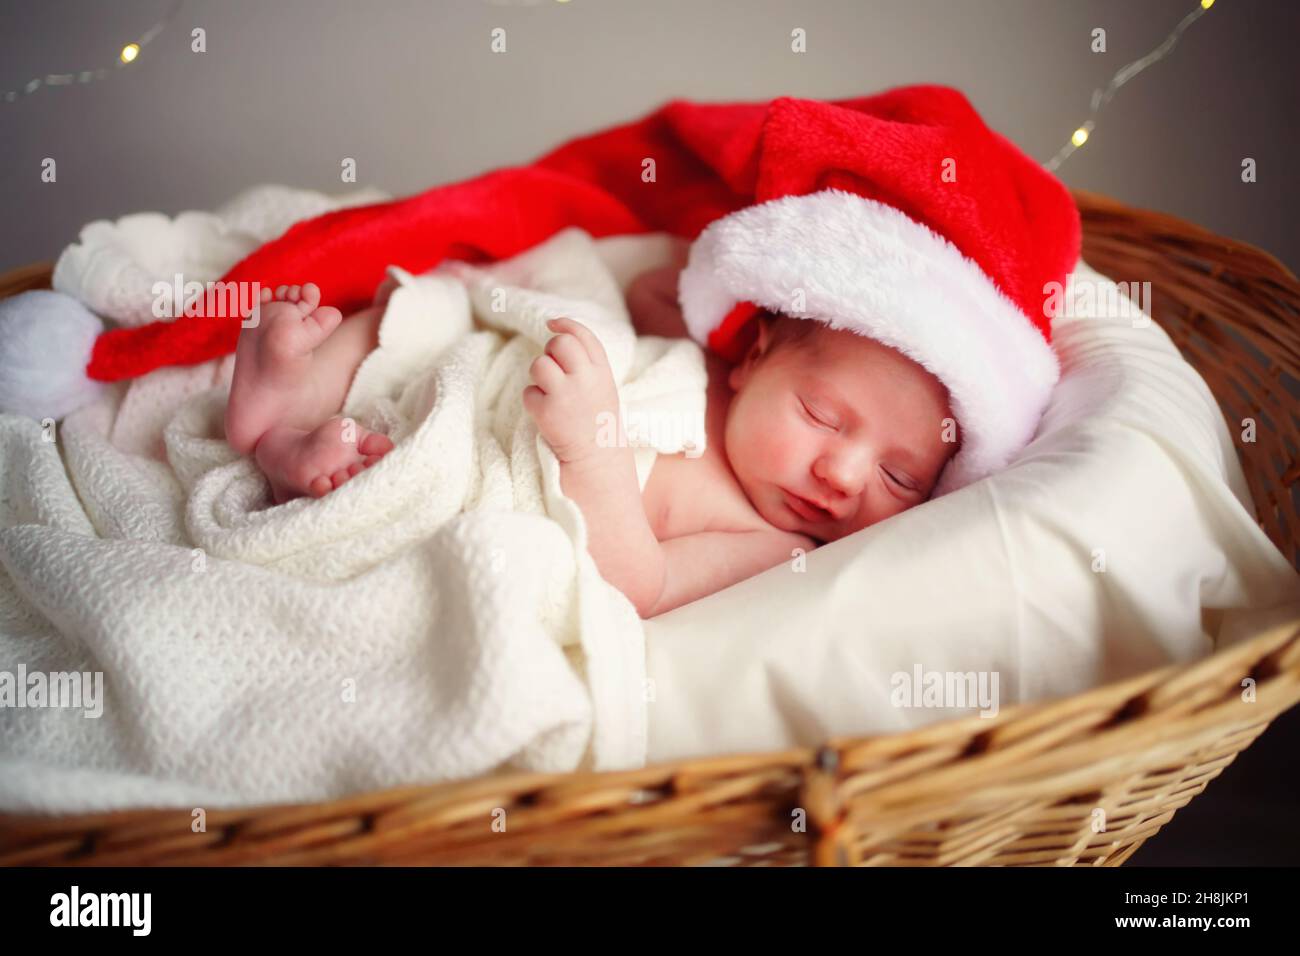 Caucasian sleeping newborn baby in Santa's Christmas cap lies in a basket under a white blanket, lights burning against the background. Stock Photo